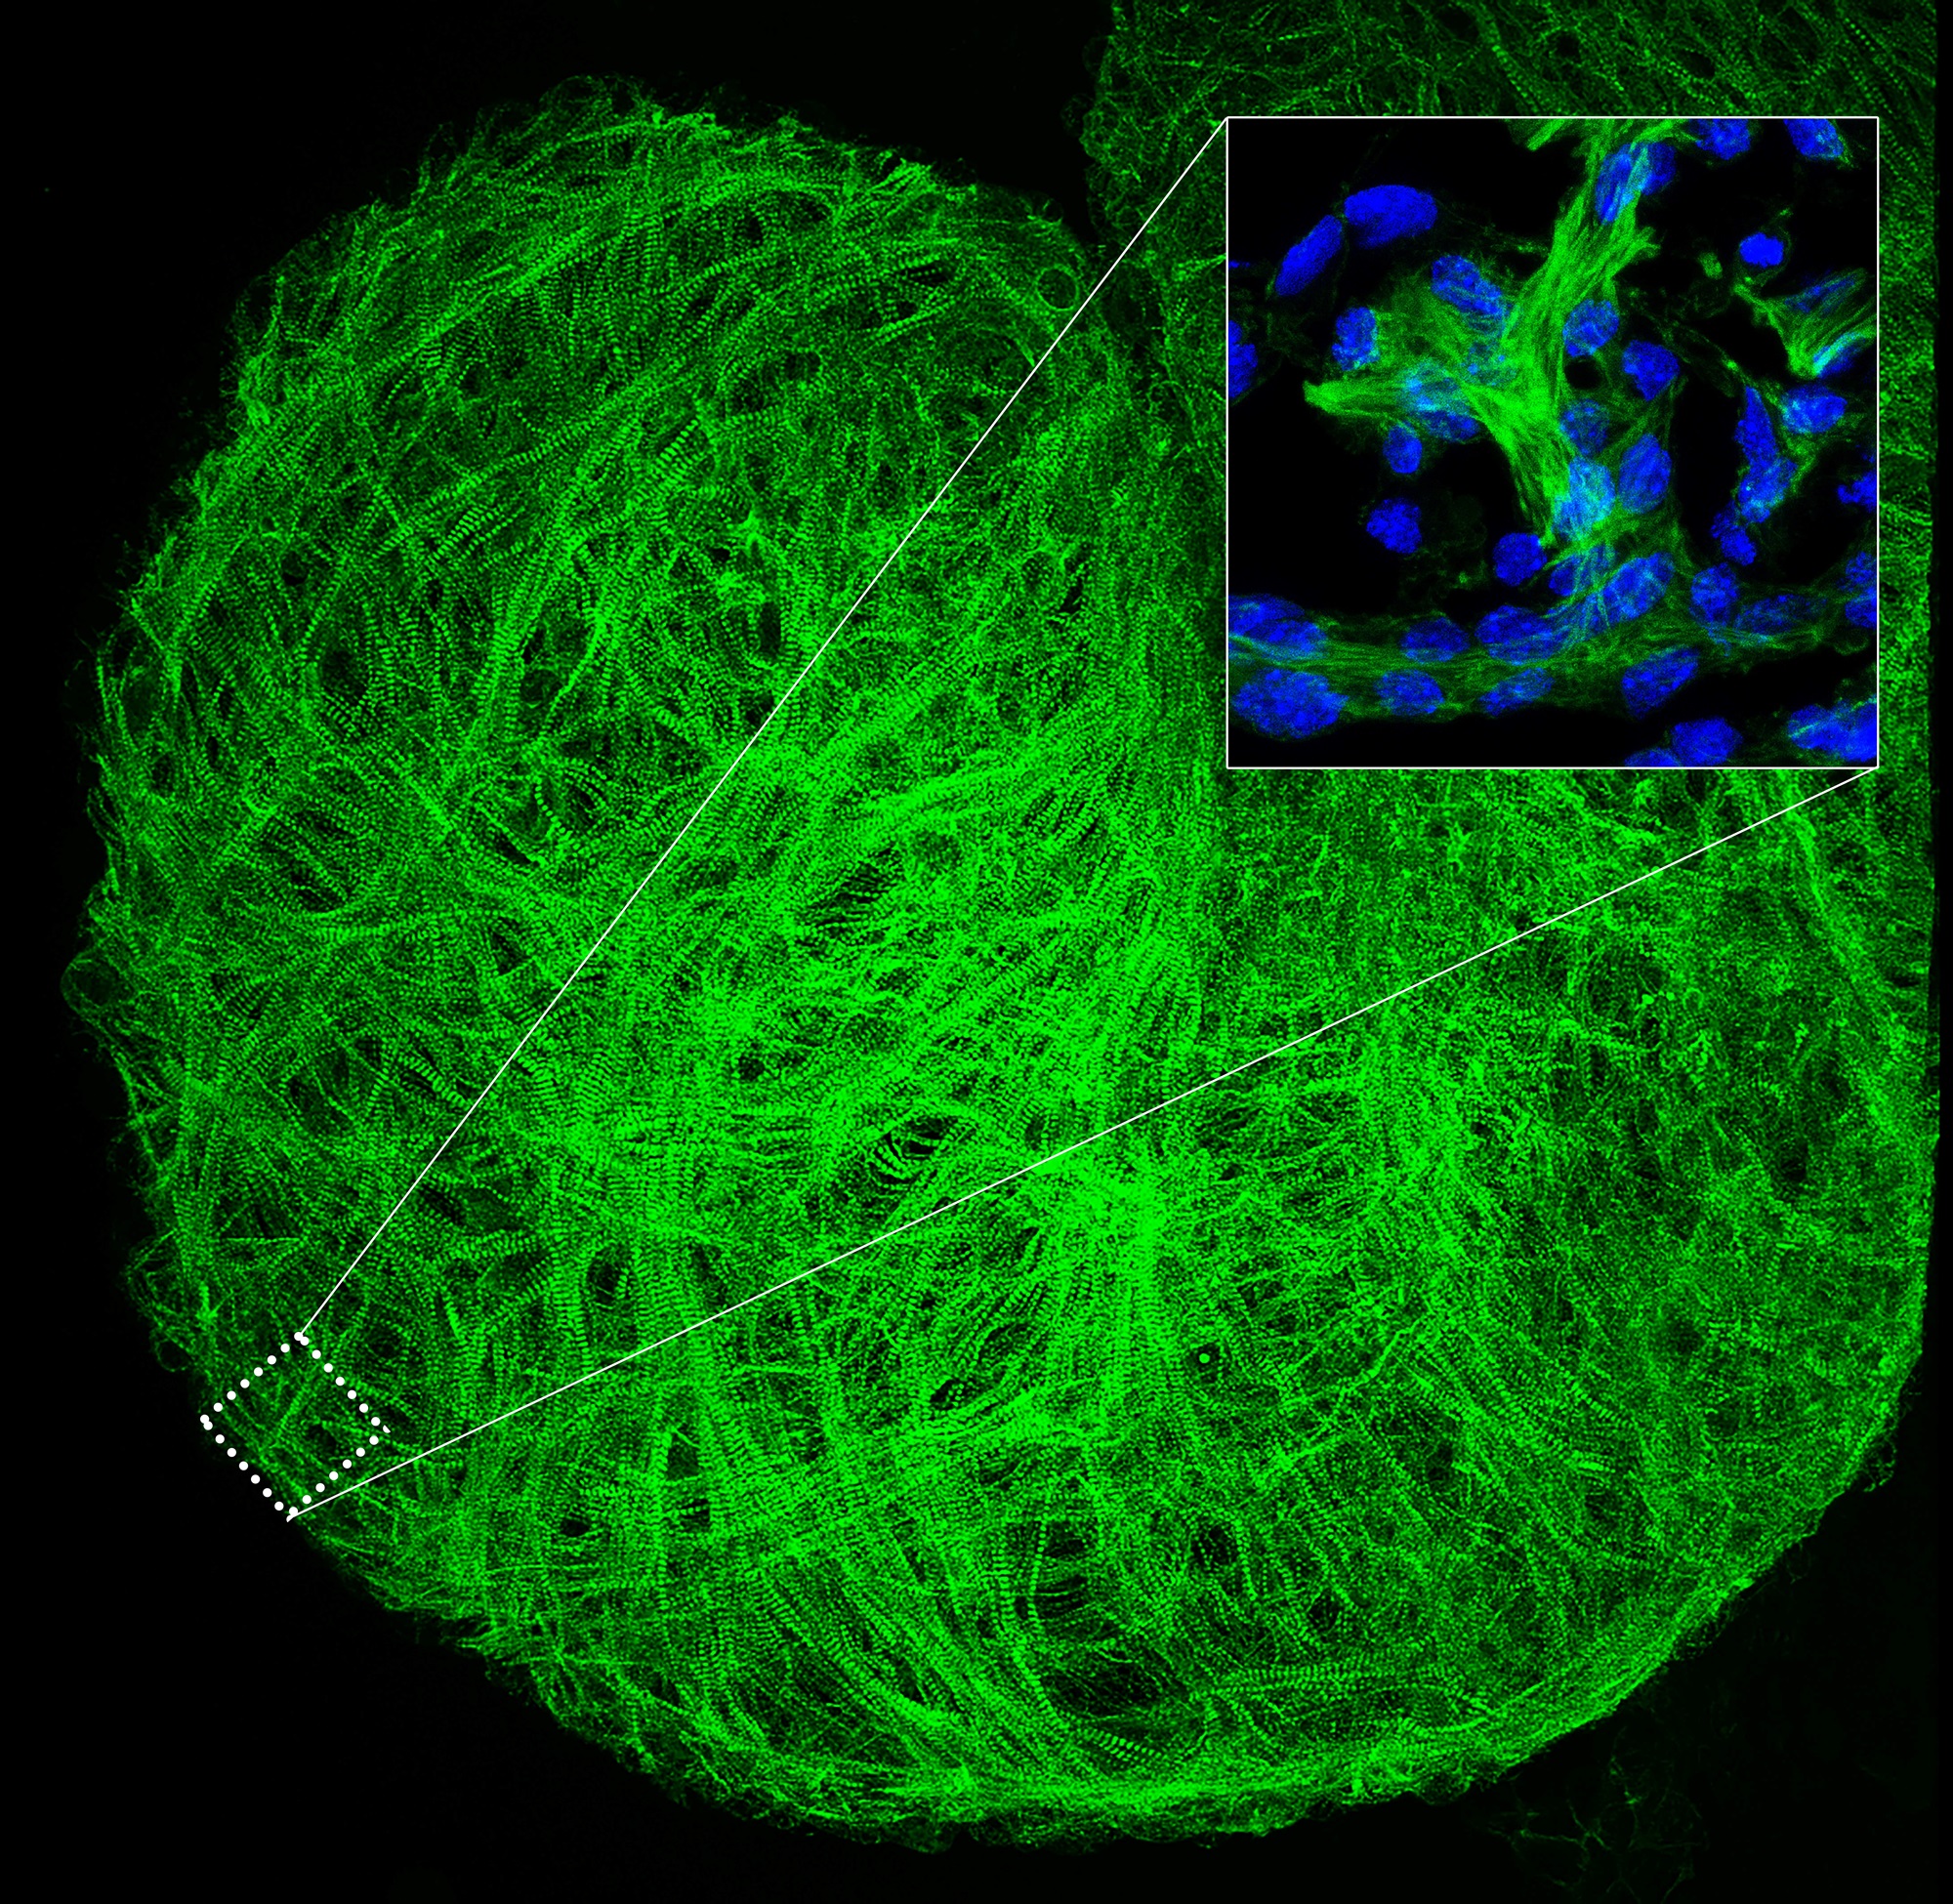 Neuregulin-1 induces changes in actin filaments during ventricular maturation. Actinin staining of a mouse embryo heart reveals a striated actin pattern corresponding to mature trabecular sarcomeres (green). The magnified view shows the differences in luminosity that distinguish the more organized actin filaments of the trabecular myocardium from the less organized compact layer